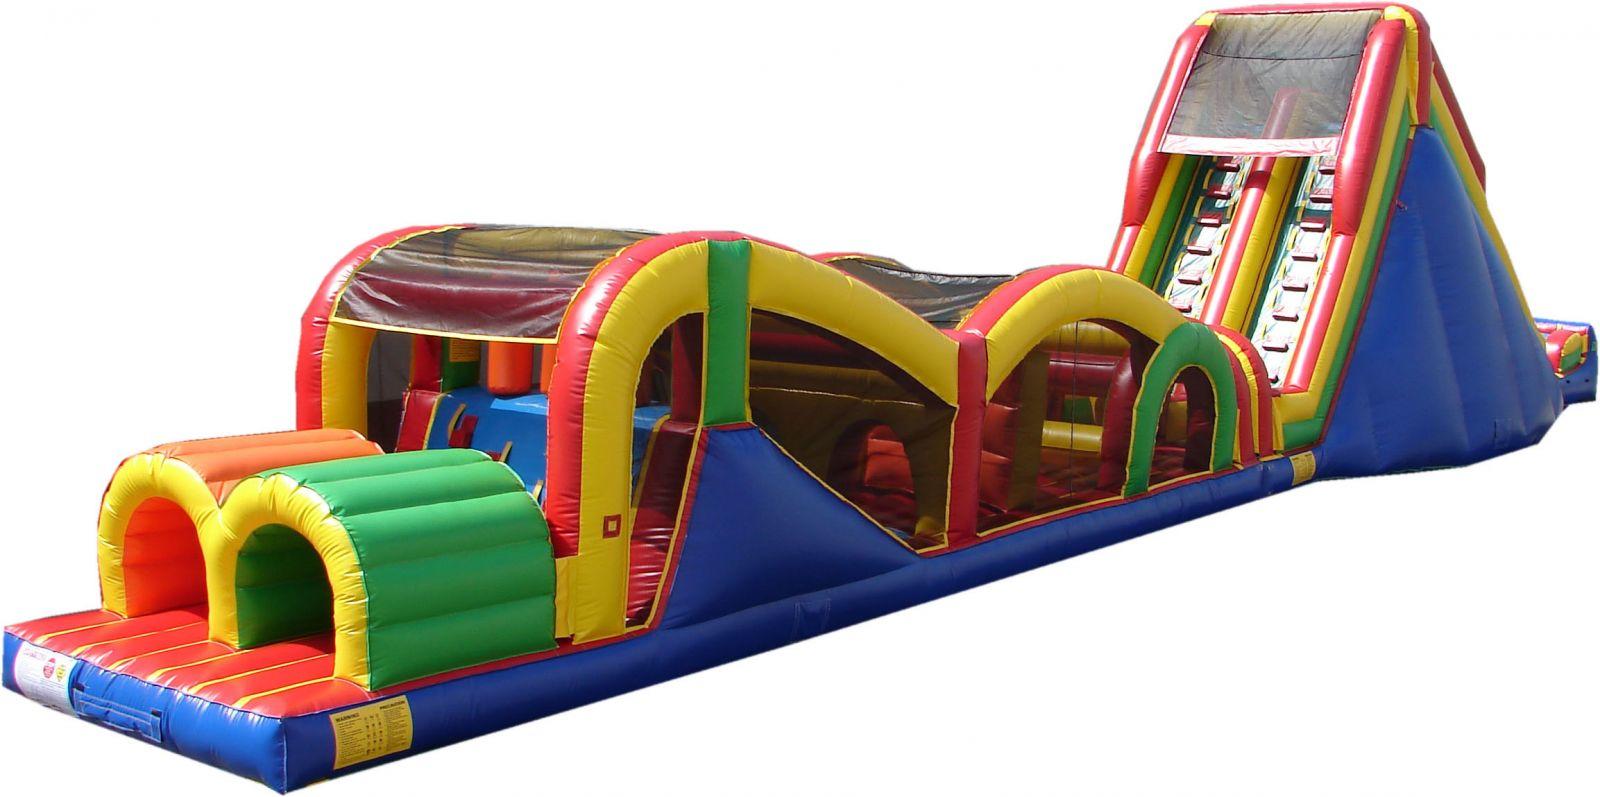 Inflatable Obstacle Course Rental in Countryside